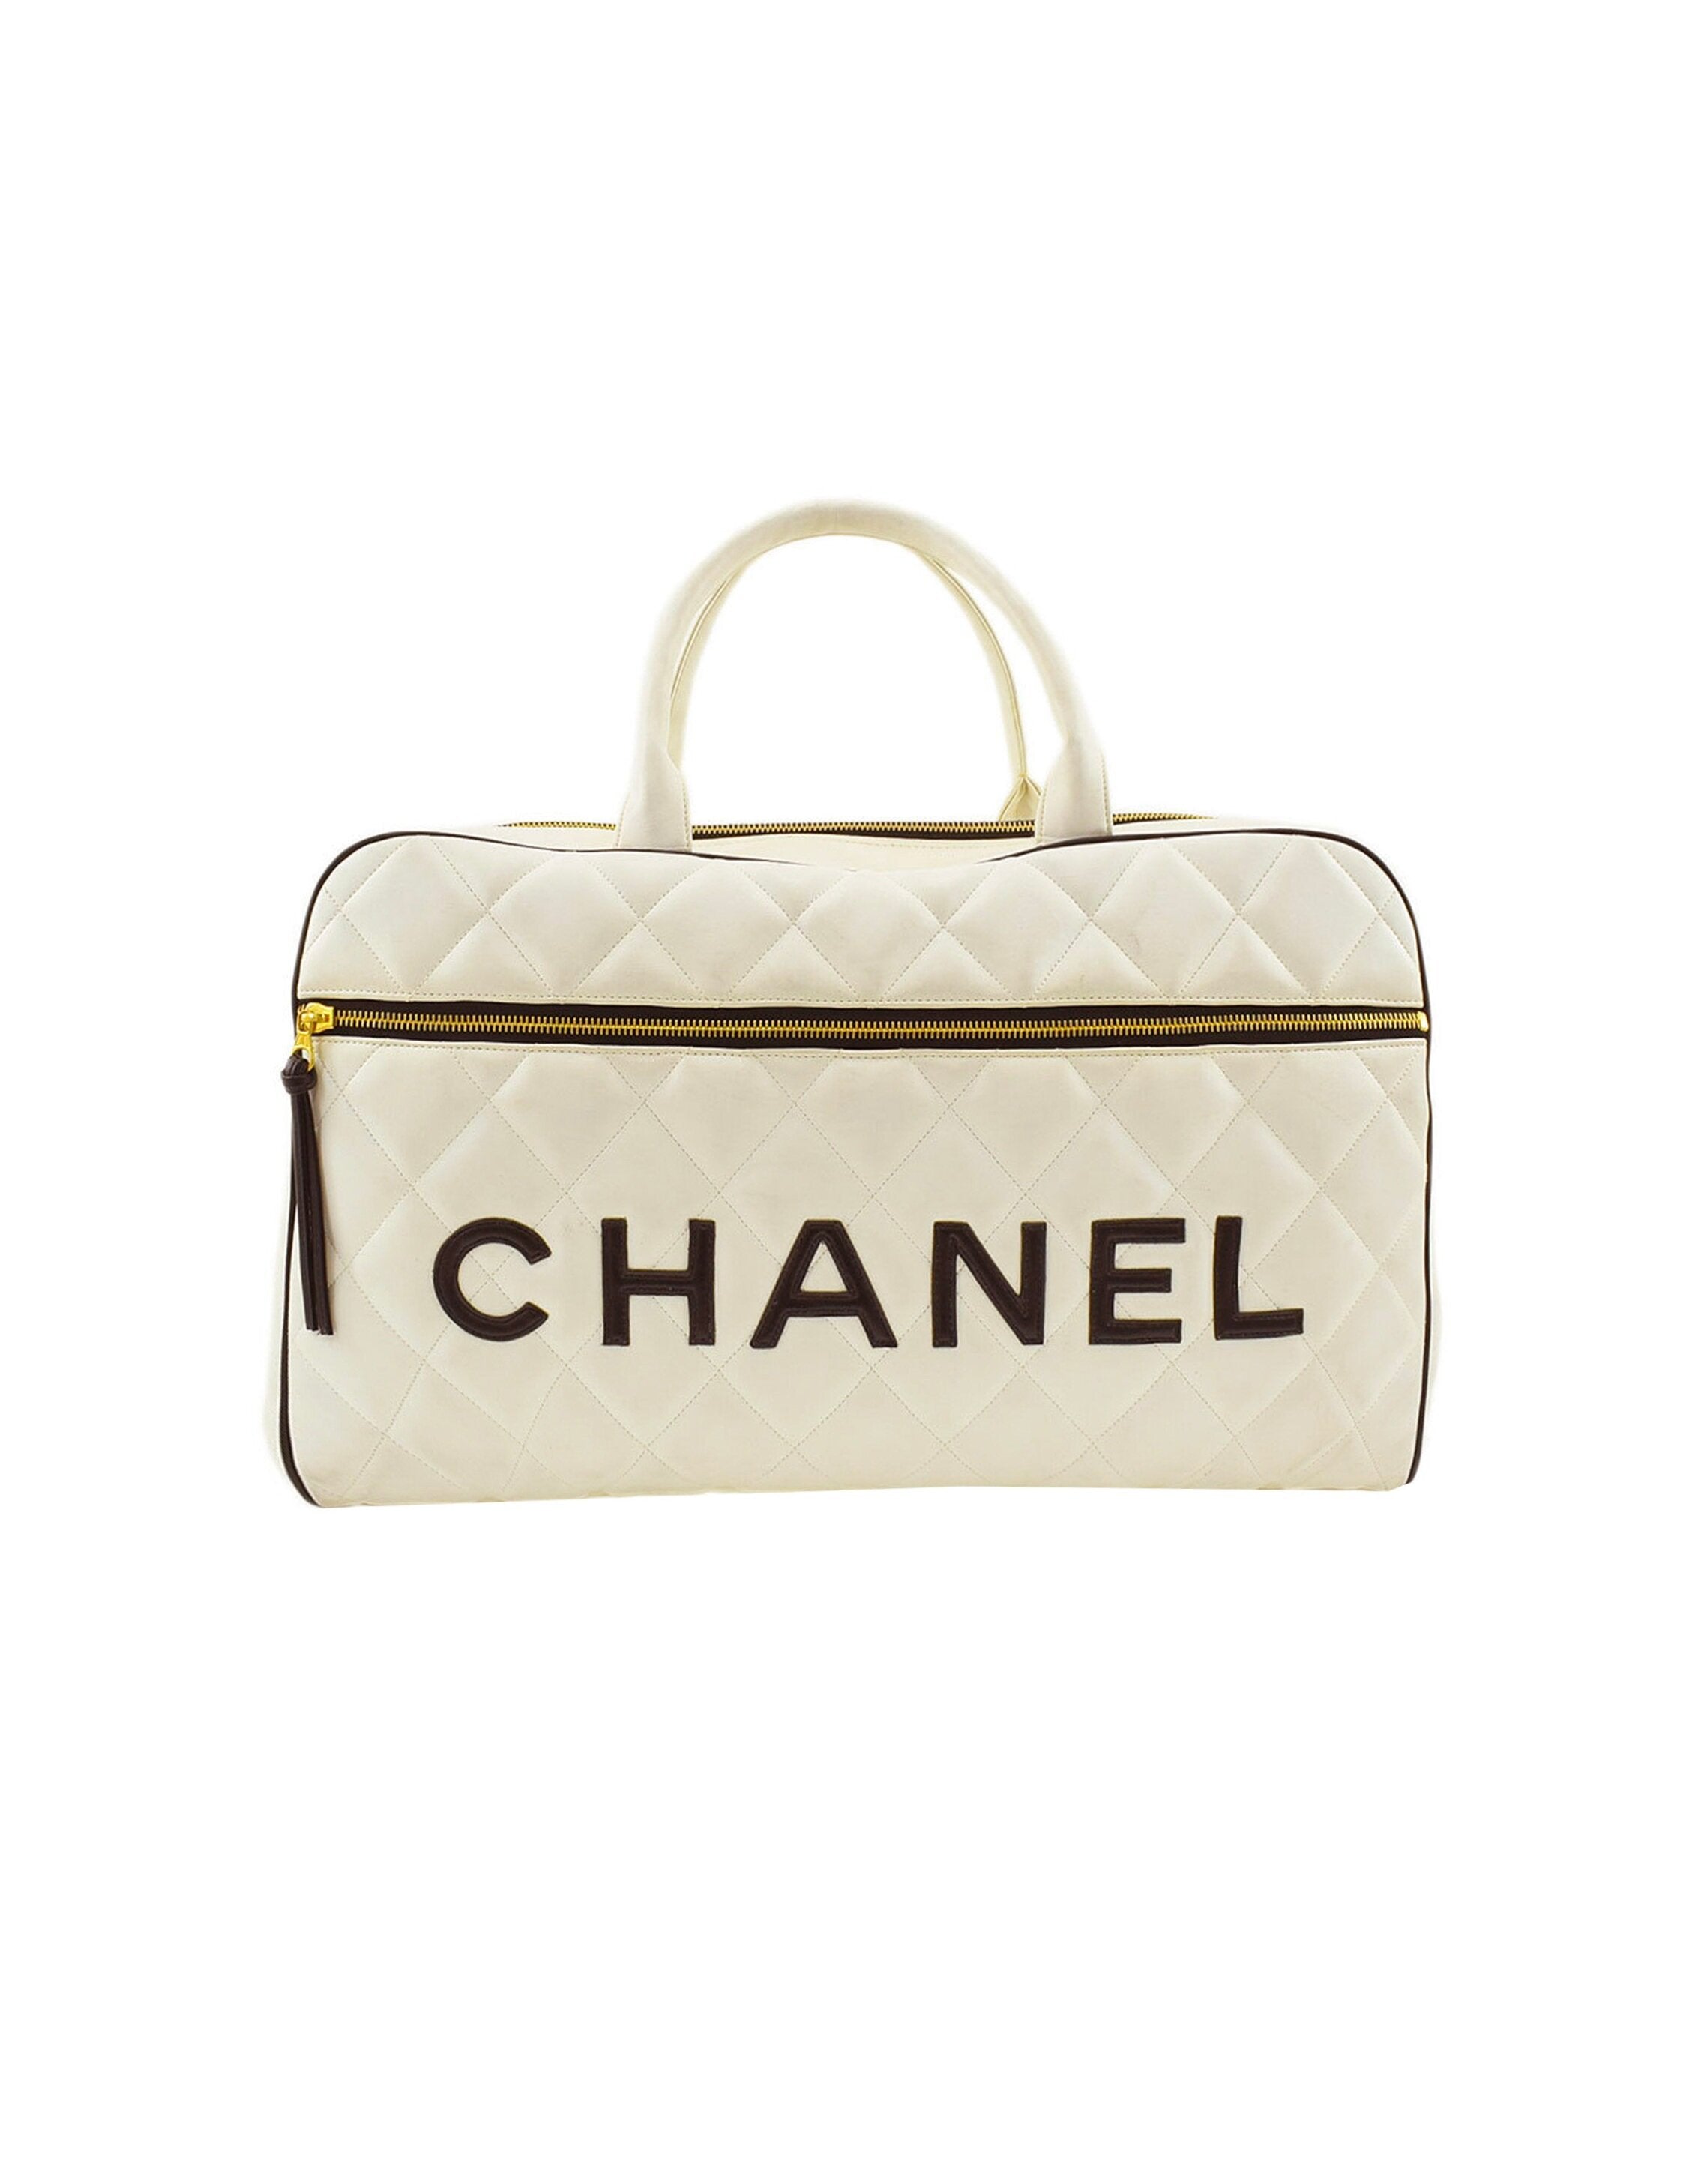 Chanel 2000s Rare XL Duffle Weekender Bag · INTO